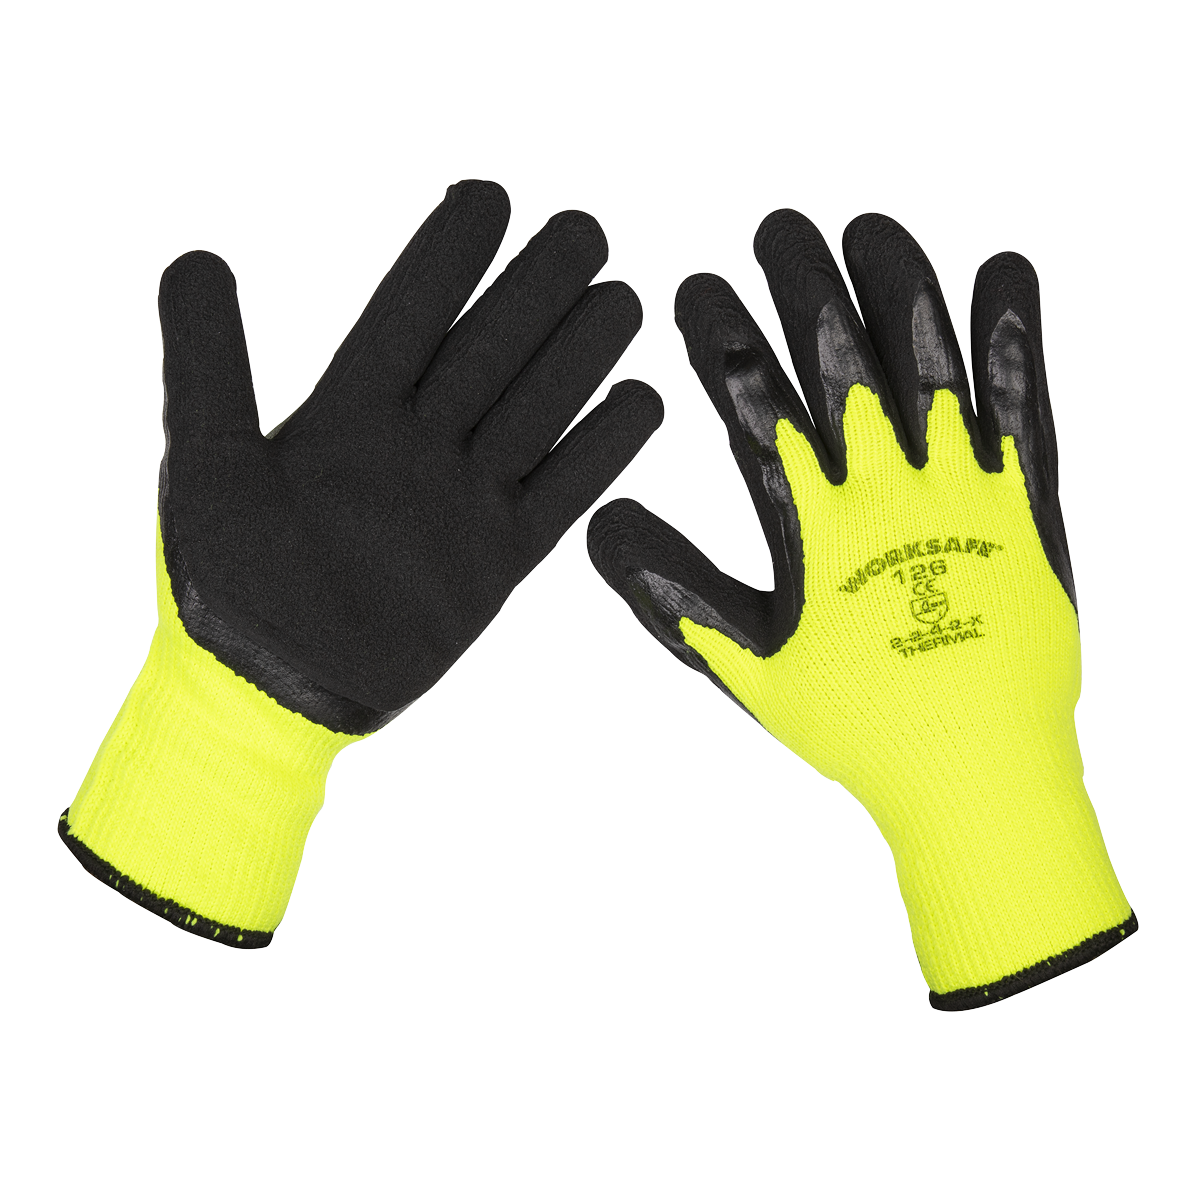 Thermal Super Grip Gloves (Large) - Pack of 12 Pairs - 9126/12 - Farming Parts